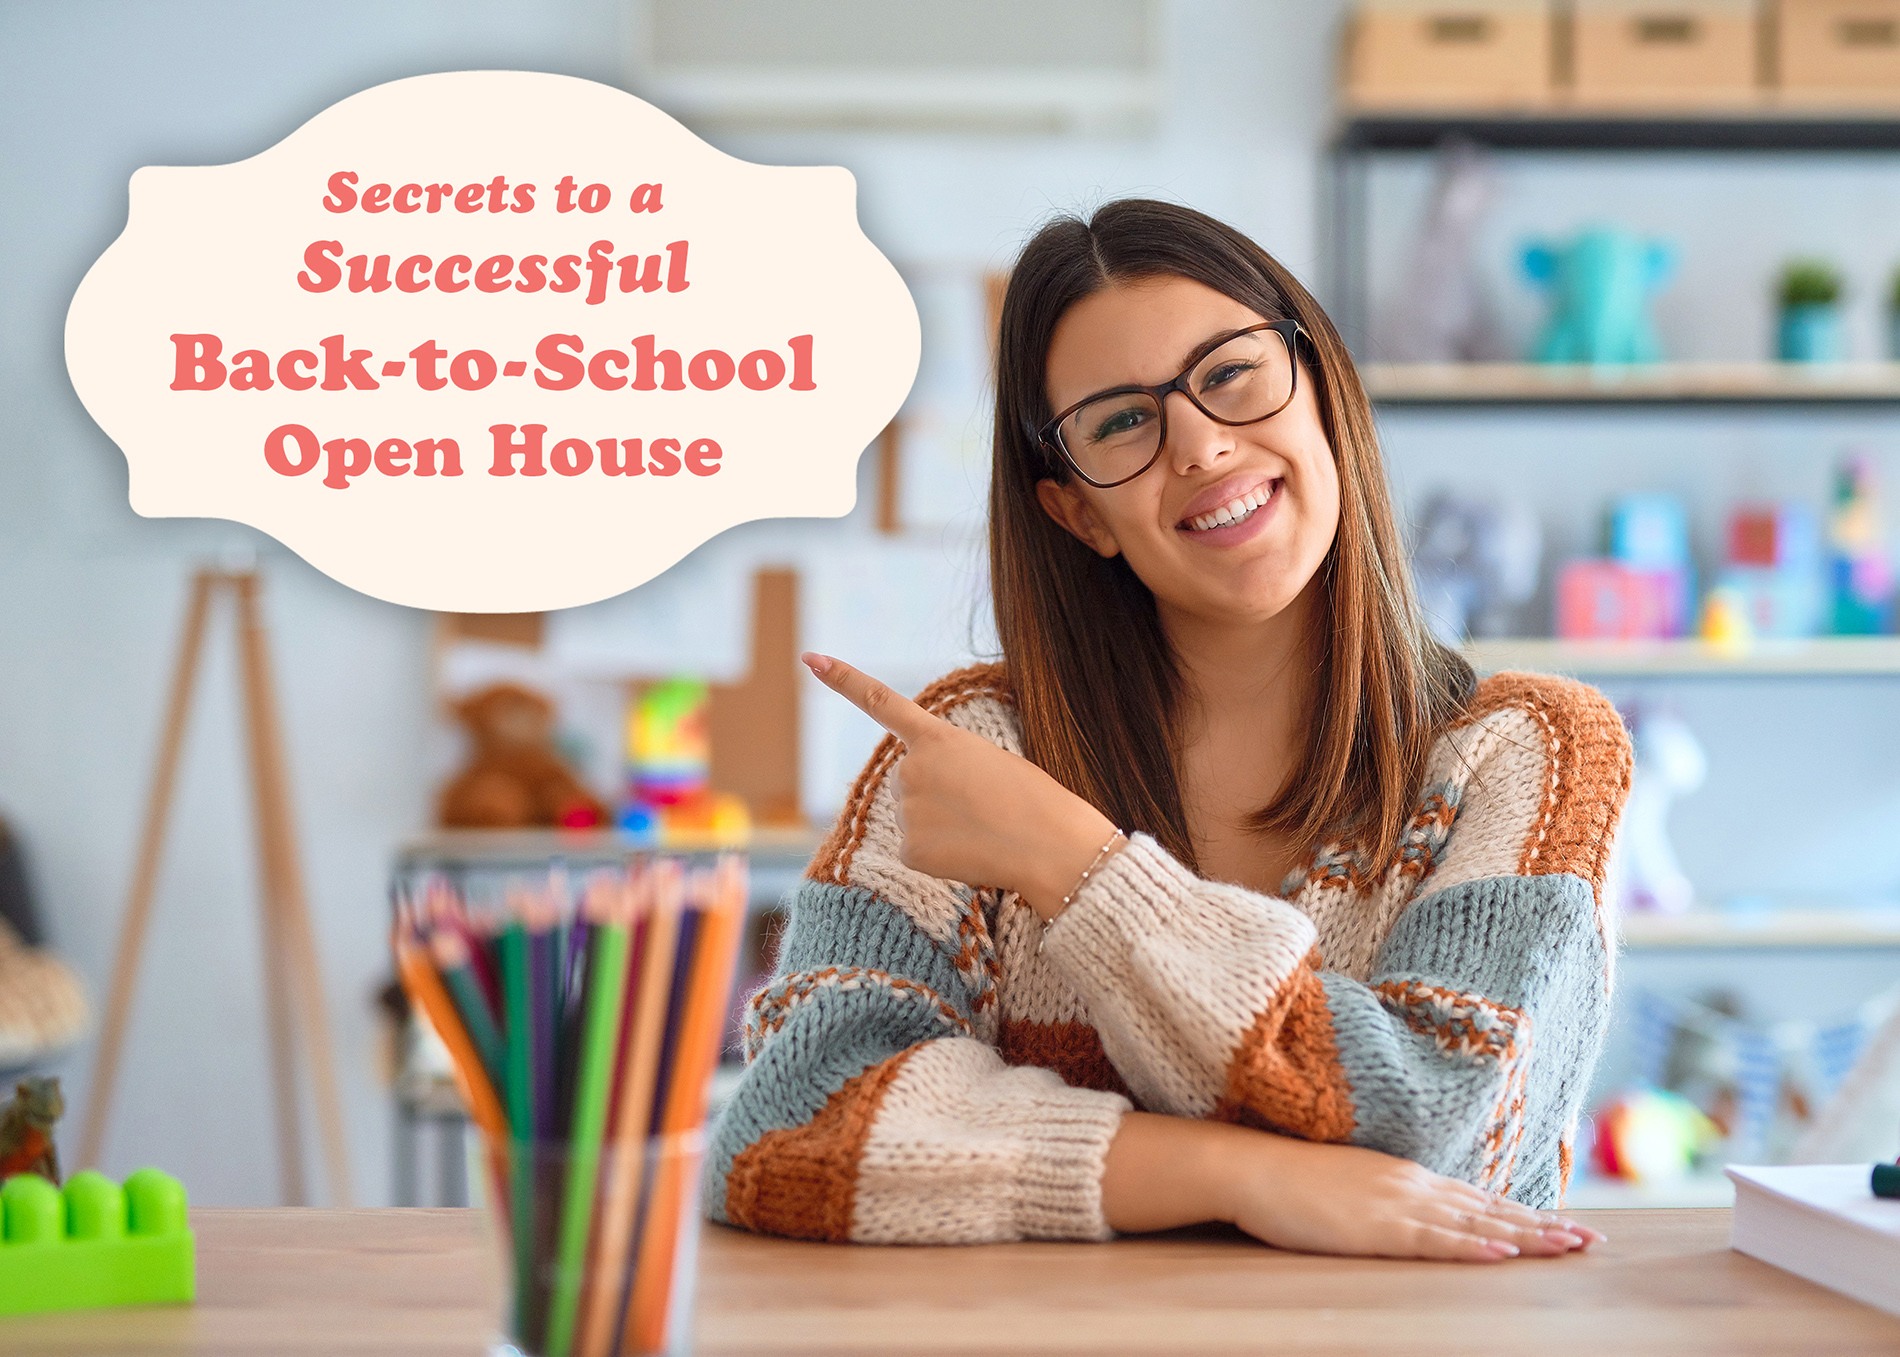 7 Tips for Back-to-School Open House 